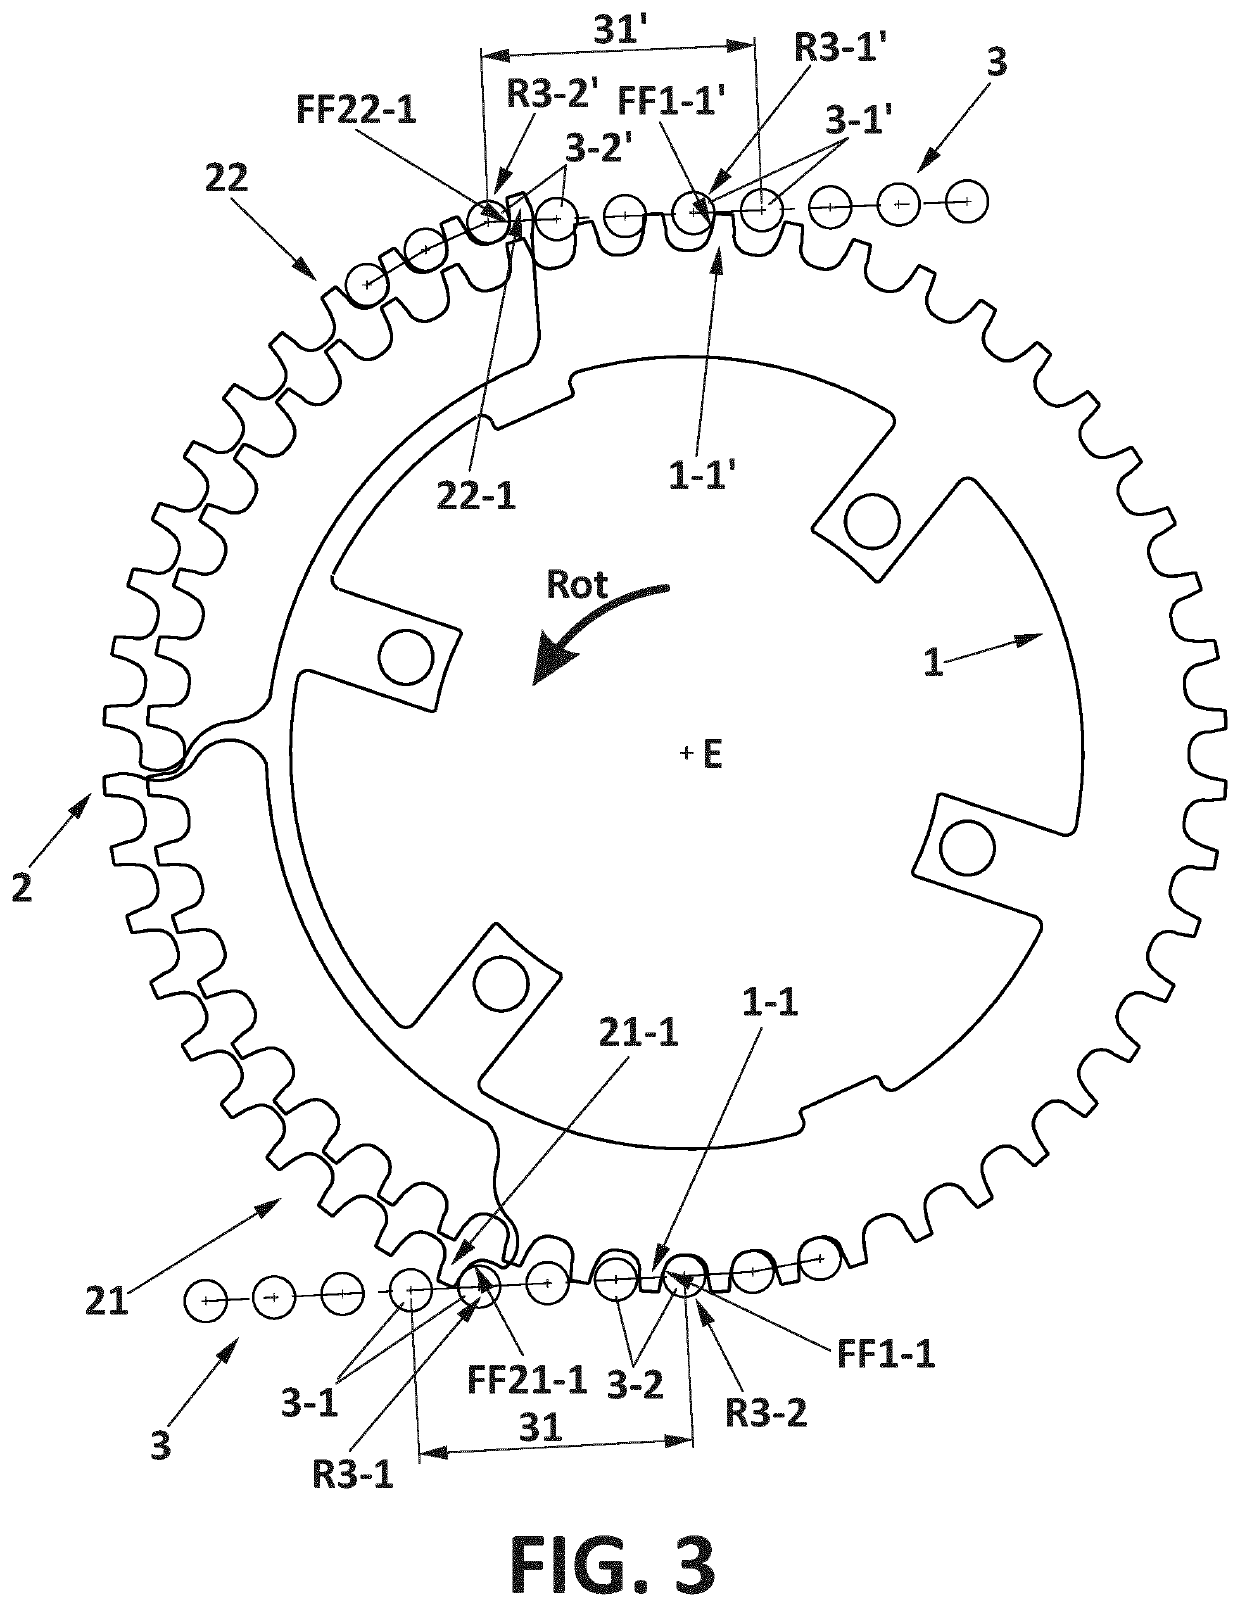 Chain-rings set for a power transmission system provided with segmented chain-rings in different planes